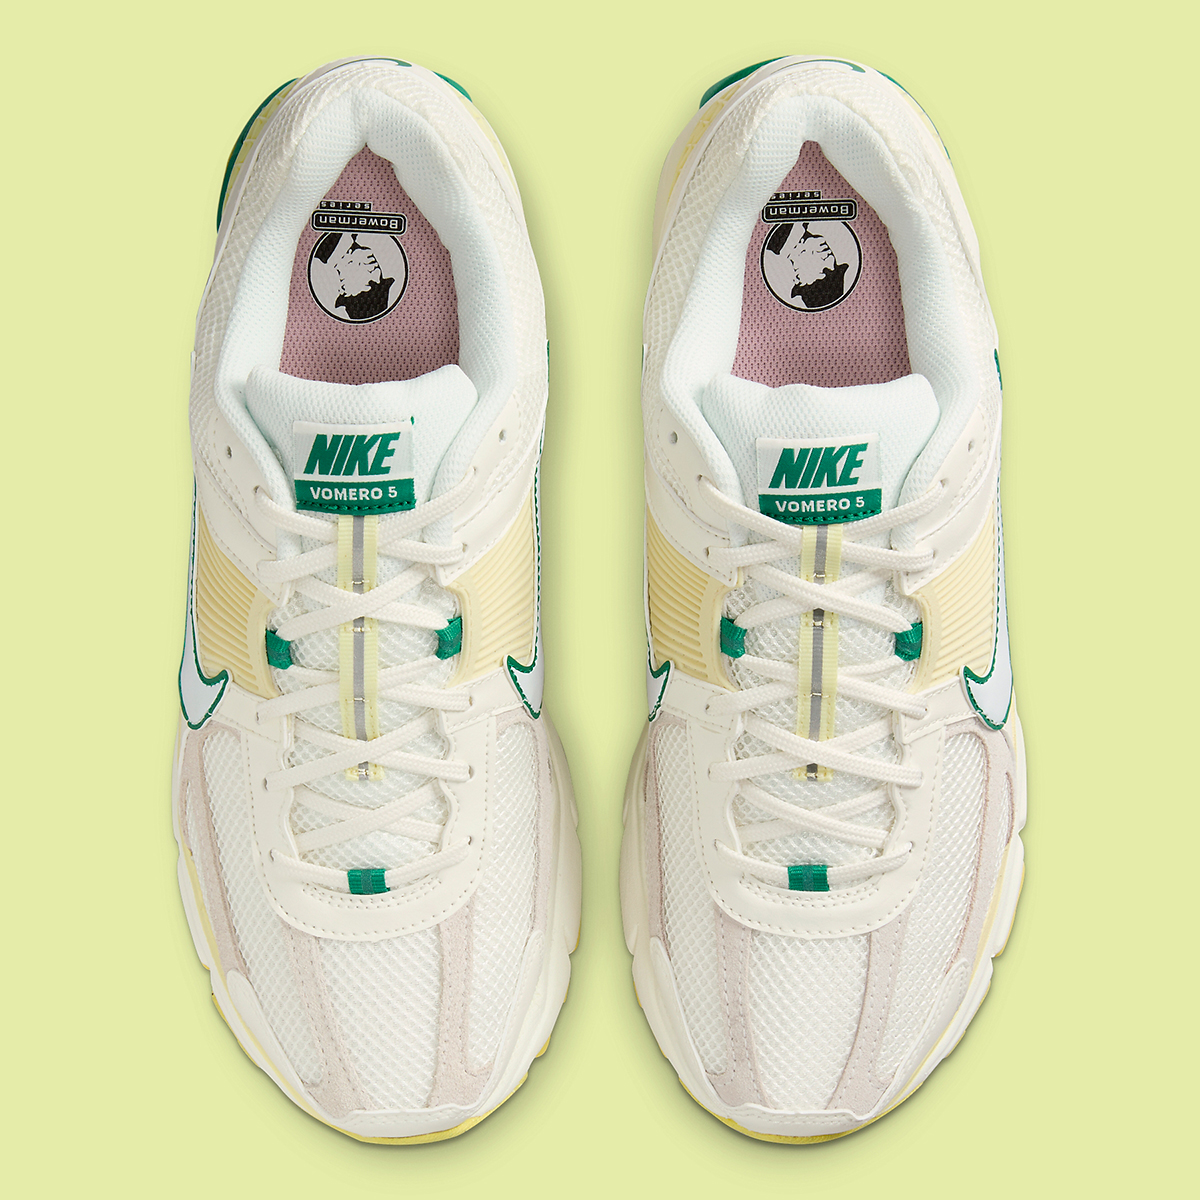 Nike Nike Gets dissected Sail White Malachite Alabaster Fn8361 100 6